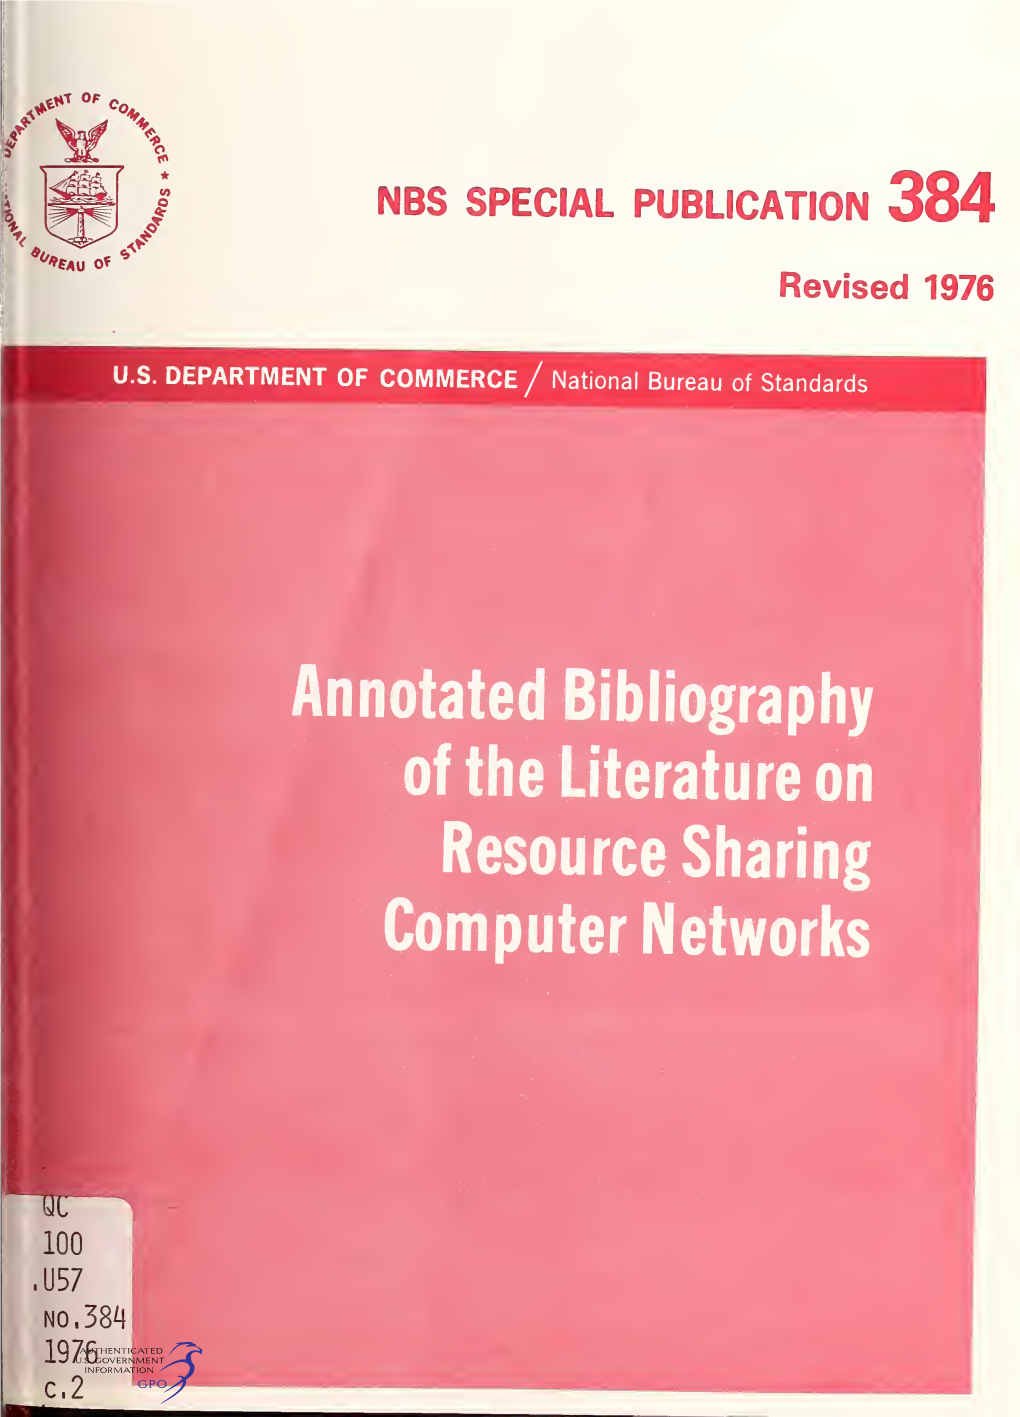 Annotated Bibliography of the Literature on Resource Sharing Computer Networks, Revised 1976